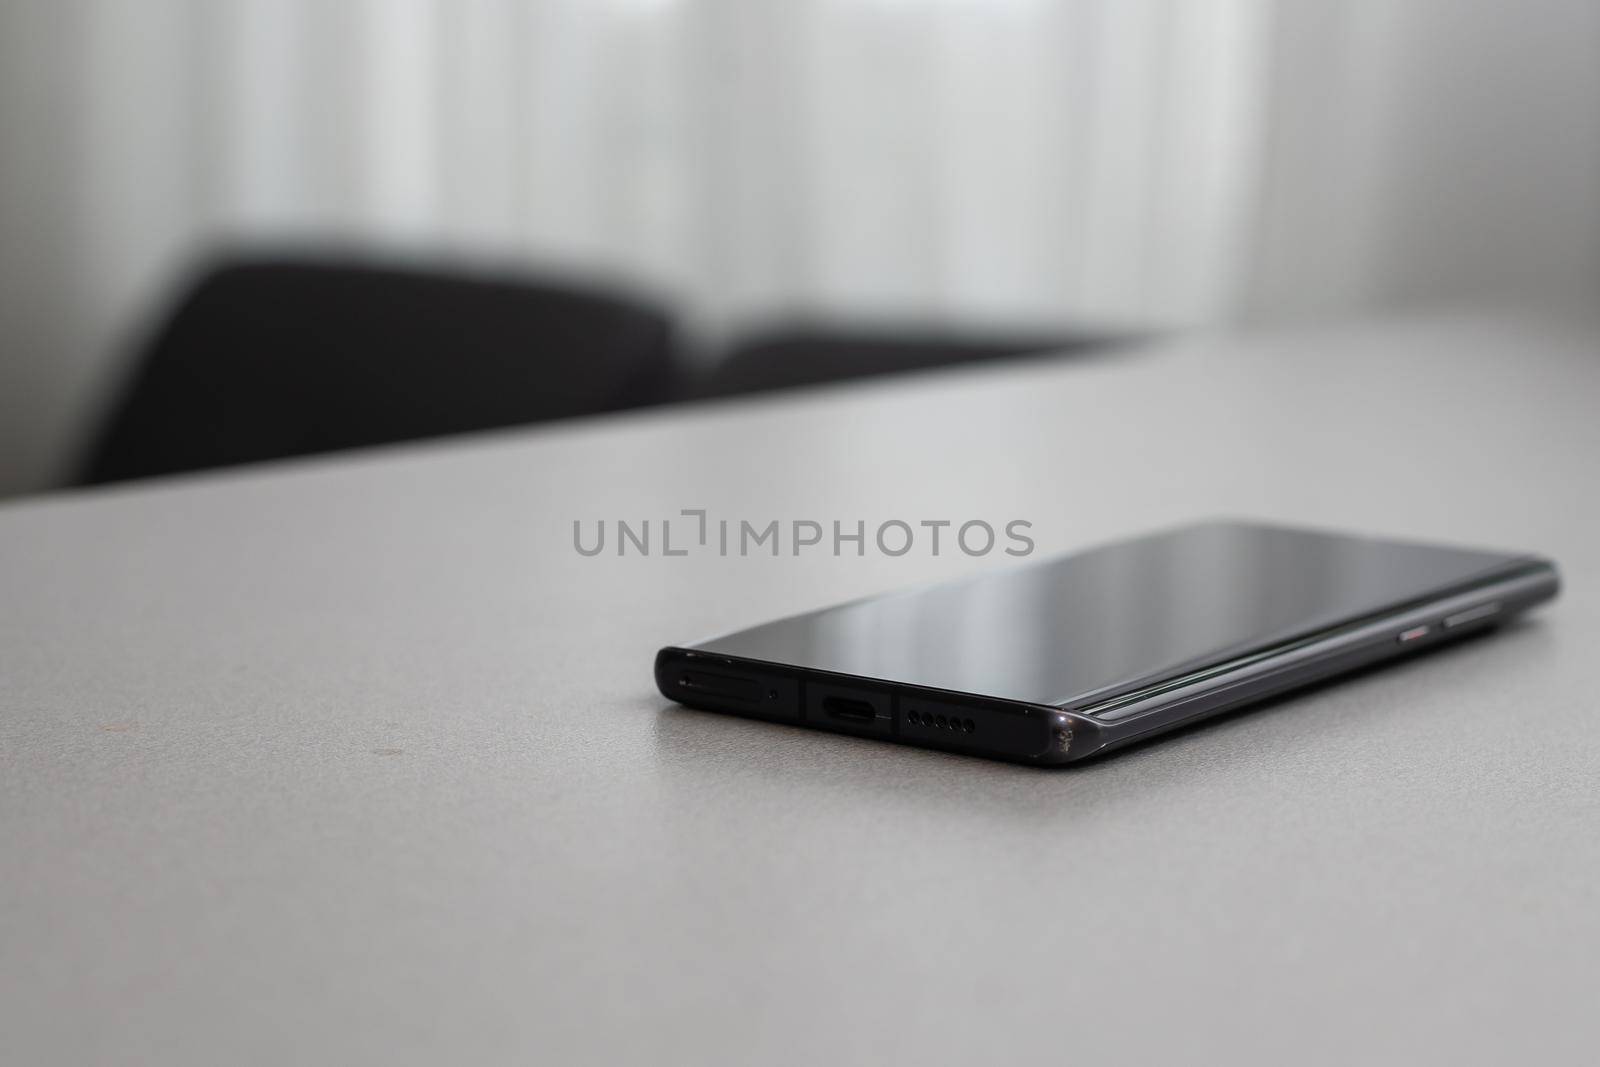 A single mobile phone on gray table by Andelov13